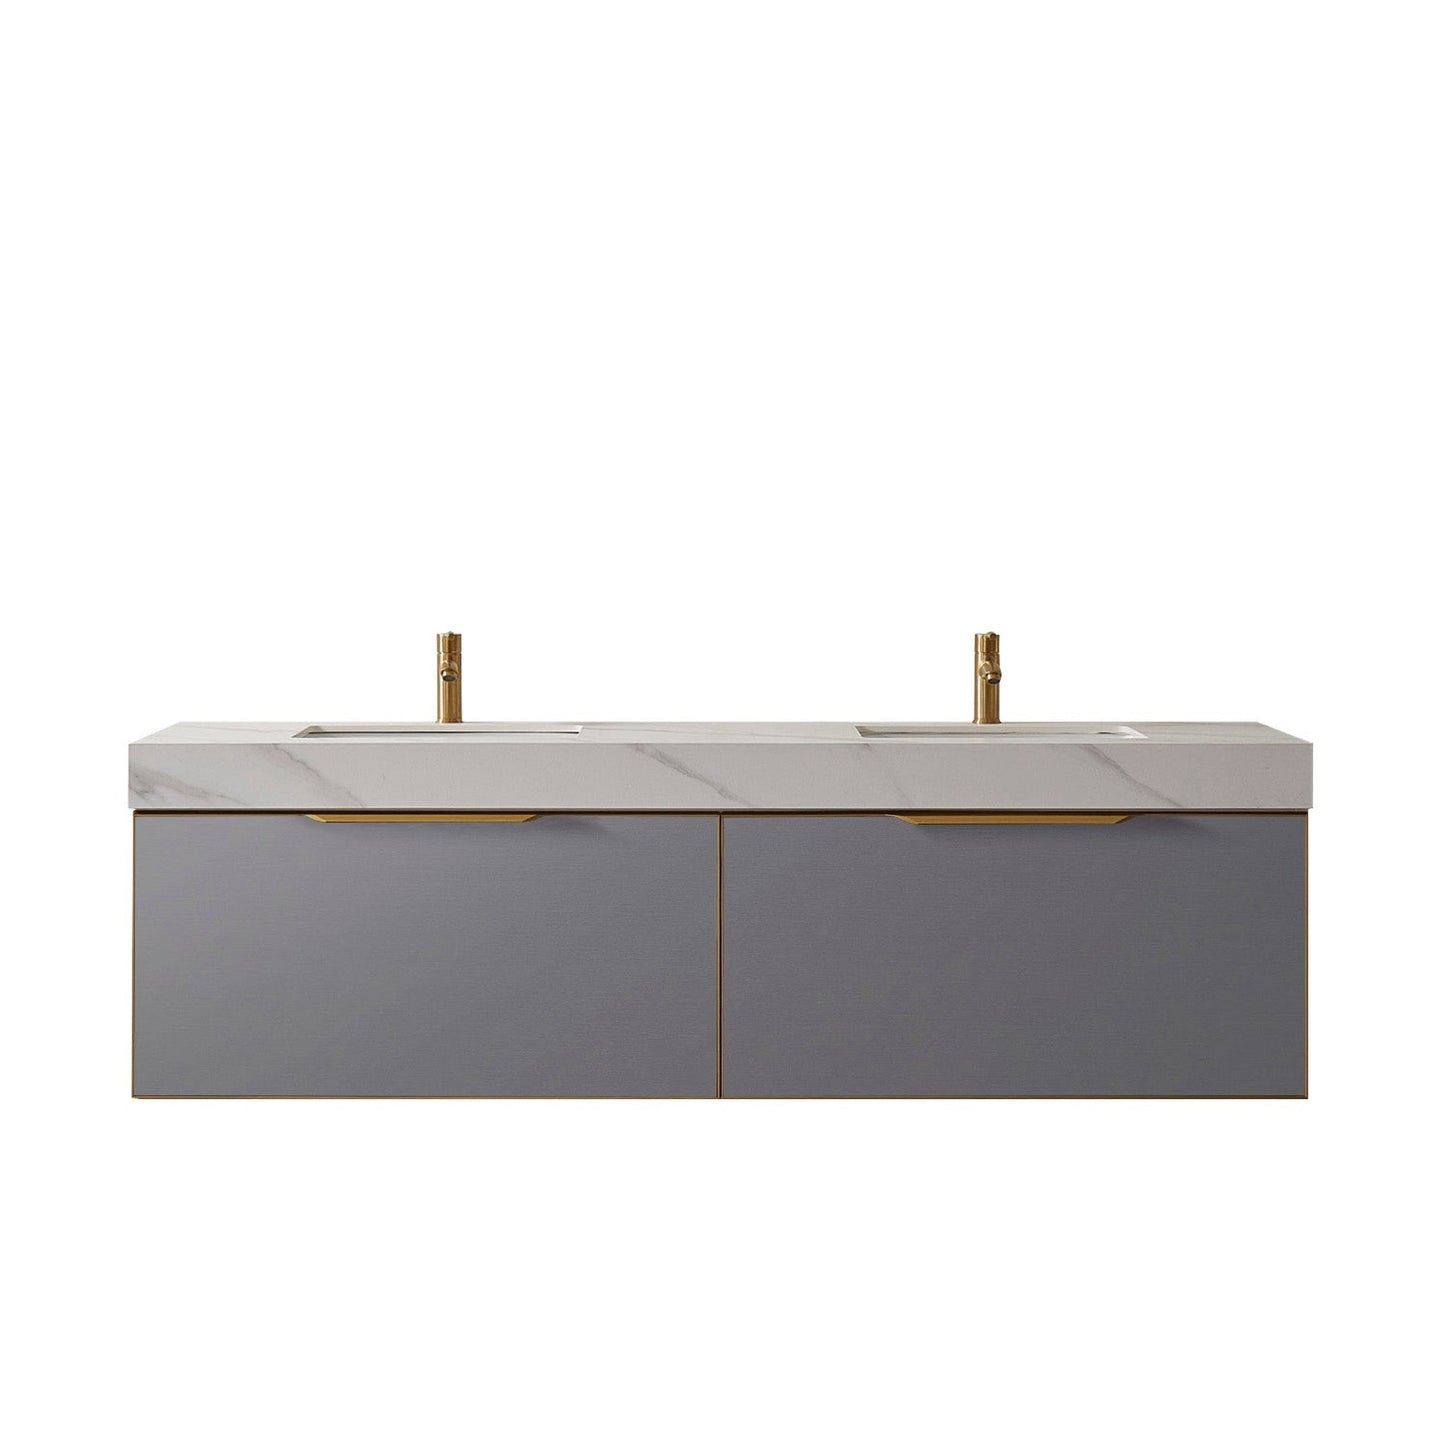 Vinnova Alicante 72" Double Vanity In Elegant Grey With White Sintered Stone Countertop And Undermount Sink Without Mirror